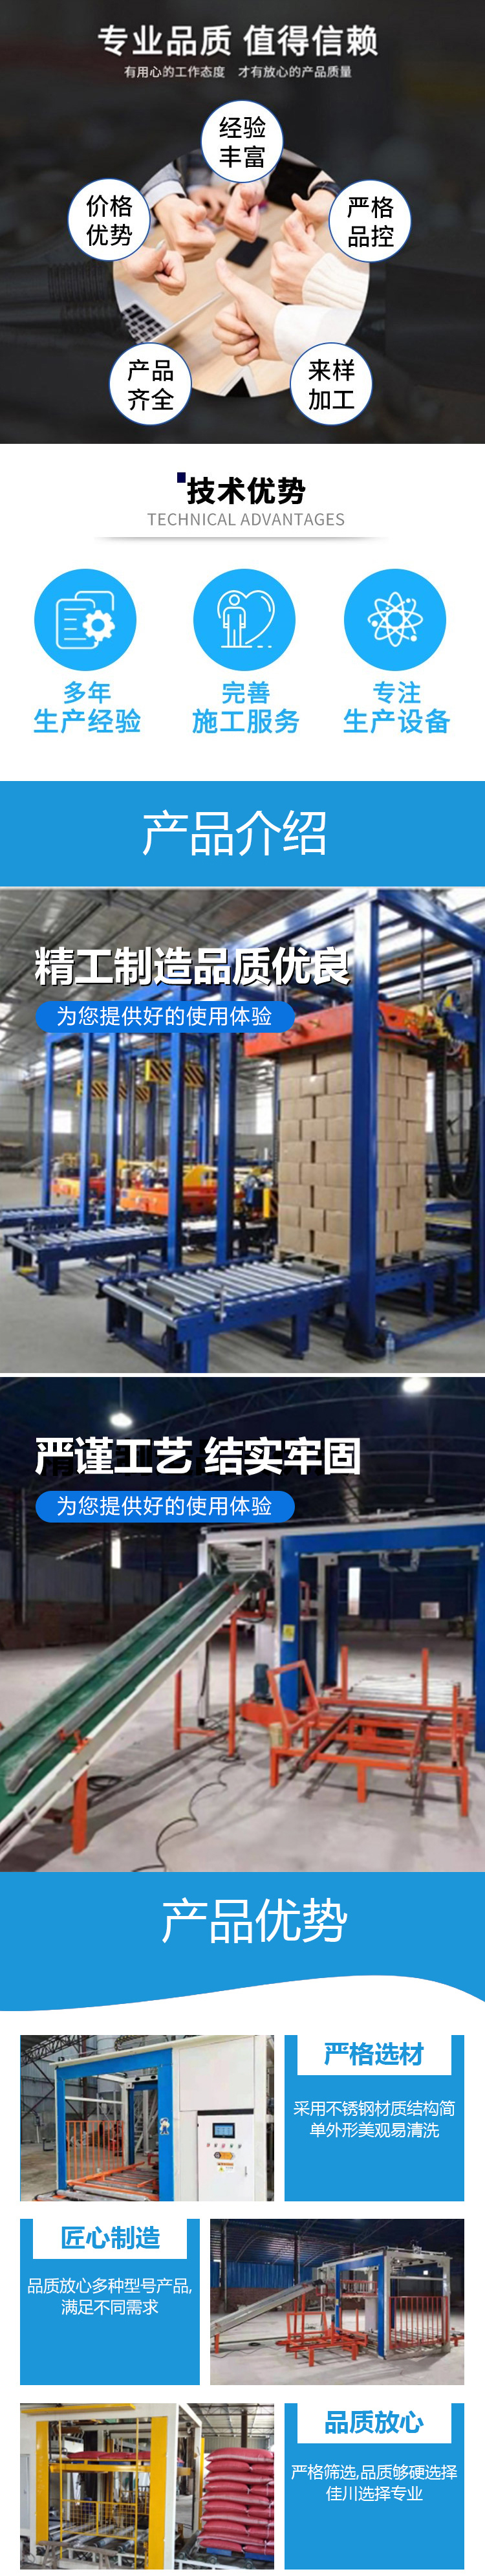 Boyou Multi axis Chemical Fertilizer Carton Handling and Stacking Gantry Fully Automatic Stacking Machine Automatic Packaging Production Line